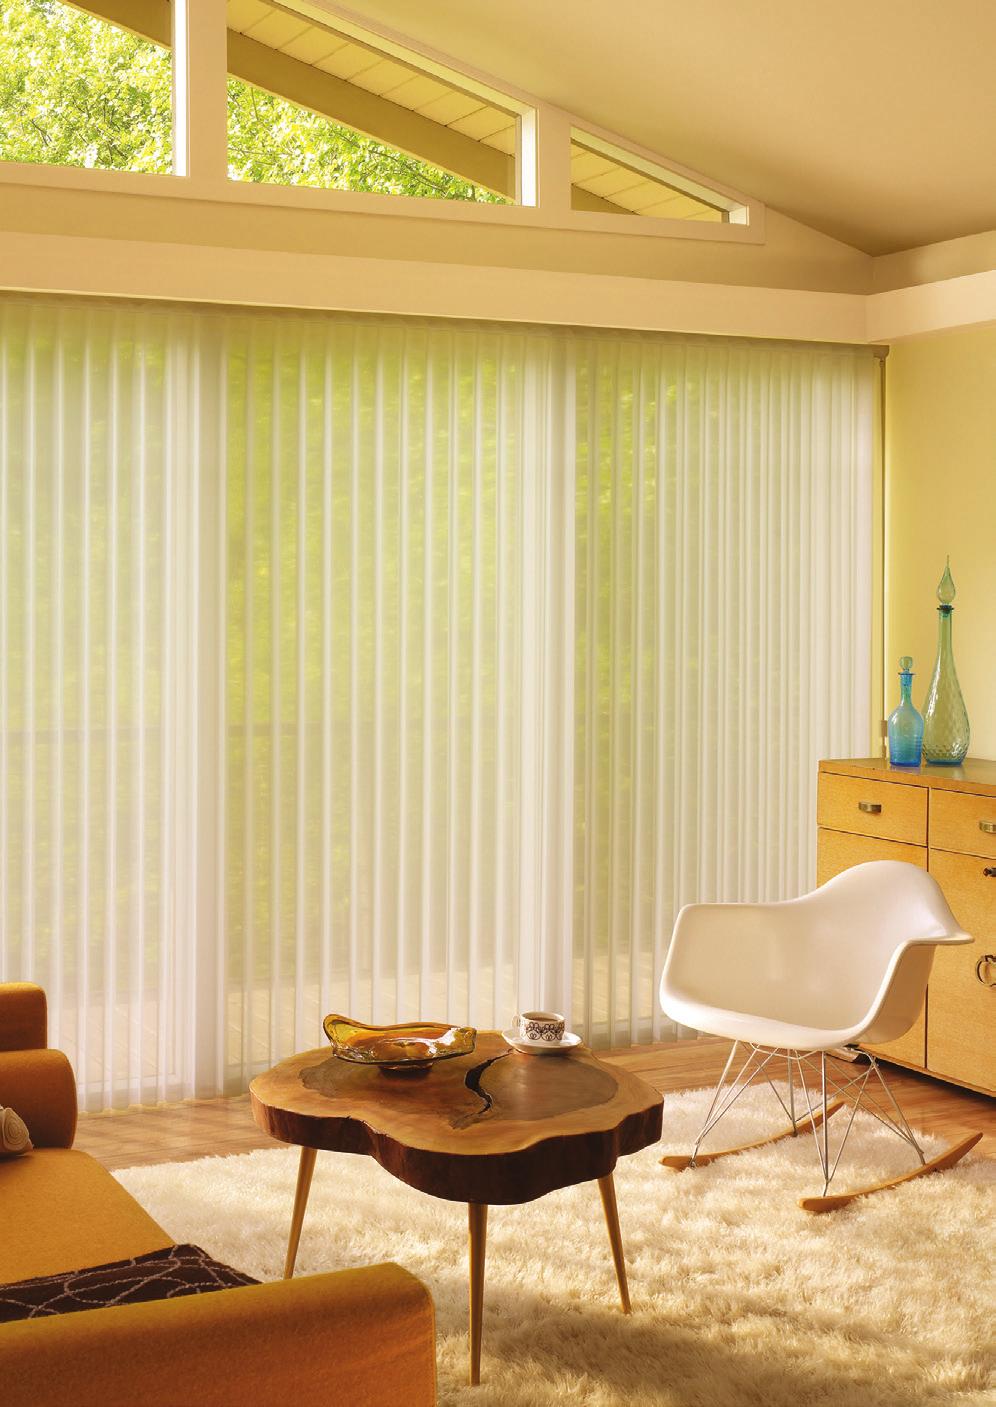 Luxaflex Luminette Privacy Sheers Luminette fabrics are 100% polyester, making them resilient, anti-static and dust resistant.